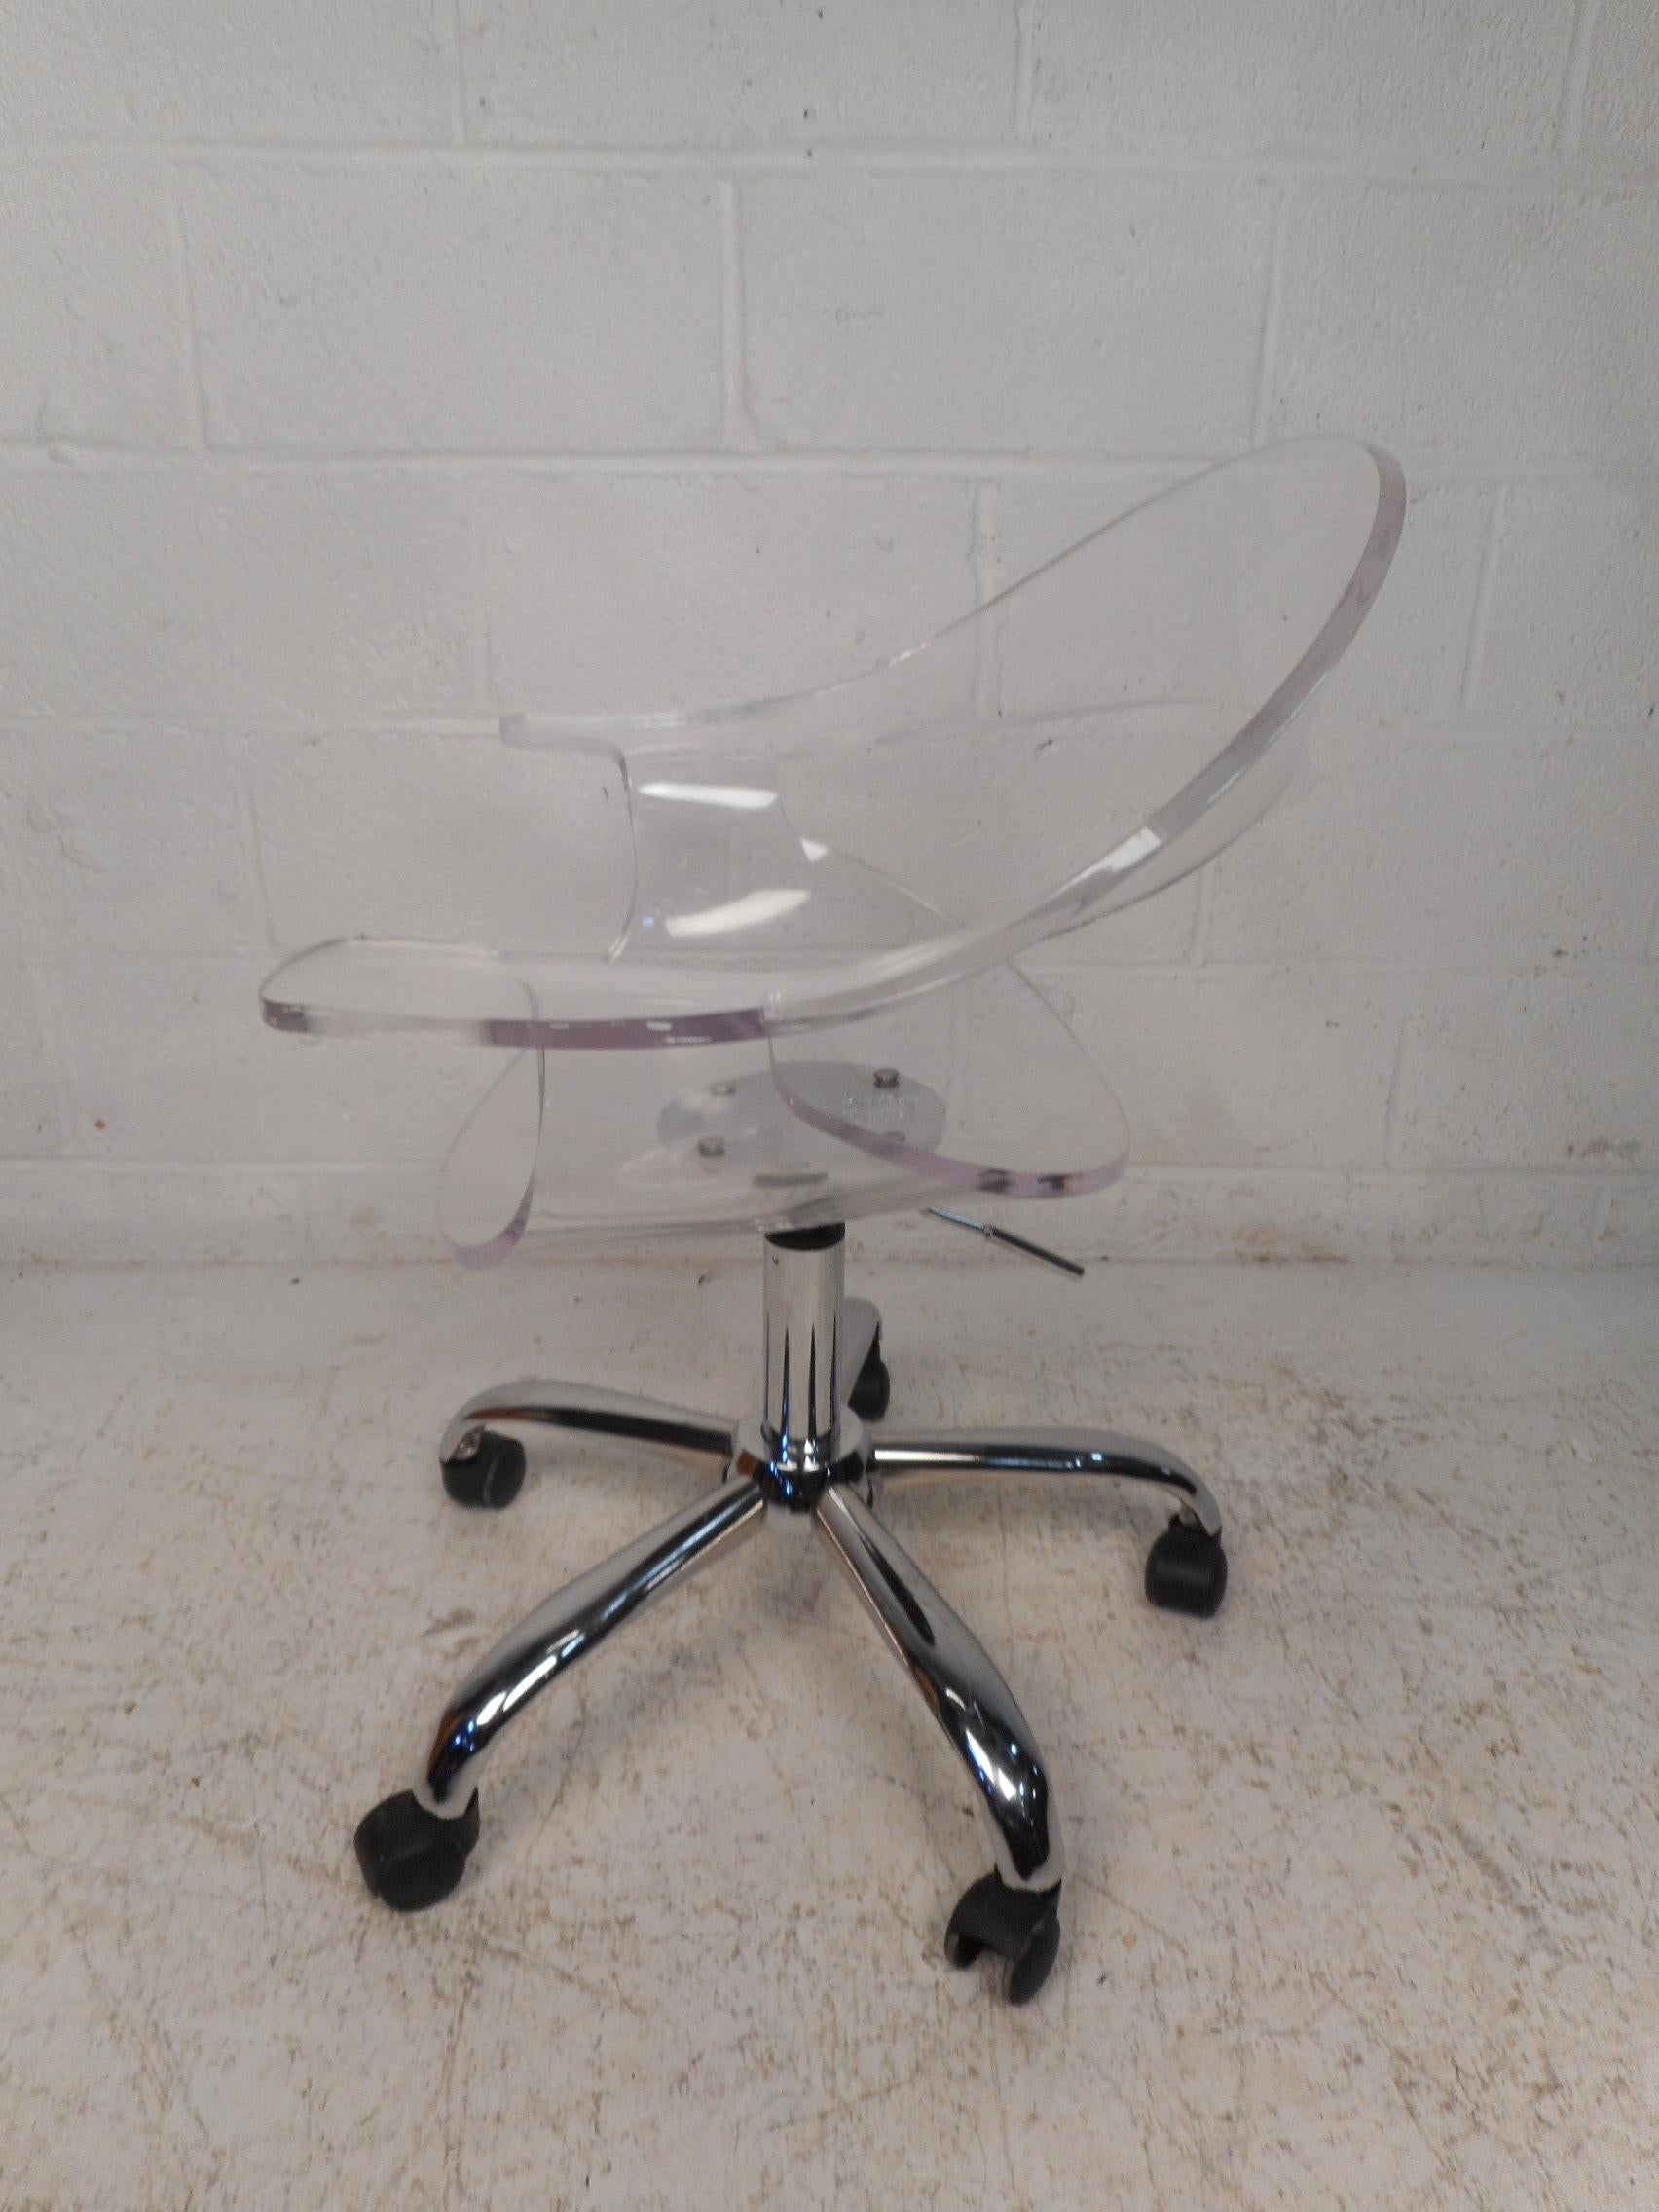 Great Lucite office chair on casters and a swivelling base. Sturdily constructed. The Lucite remains clear and transparent. Nice addition to any home or office. Please confirm item location with dealer (NJ or NY).